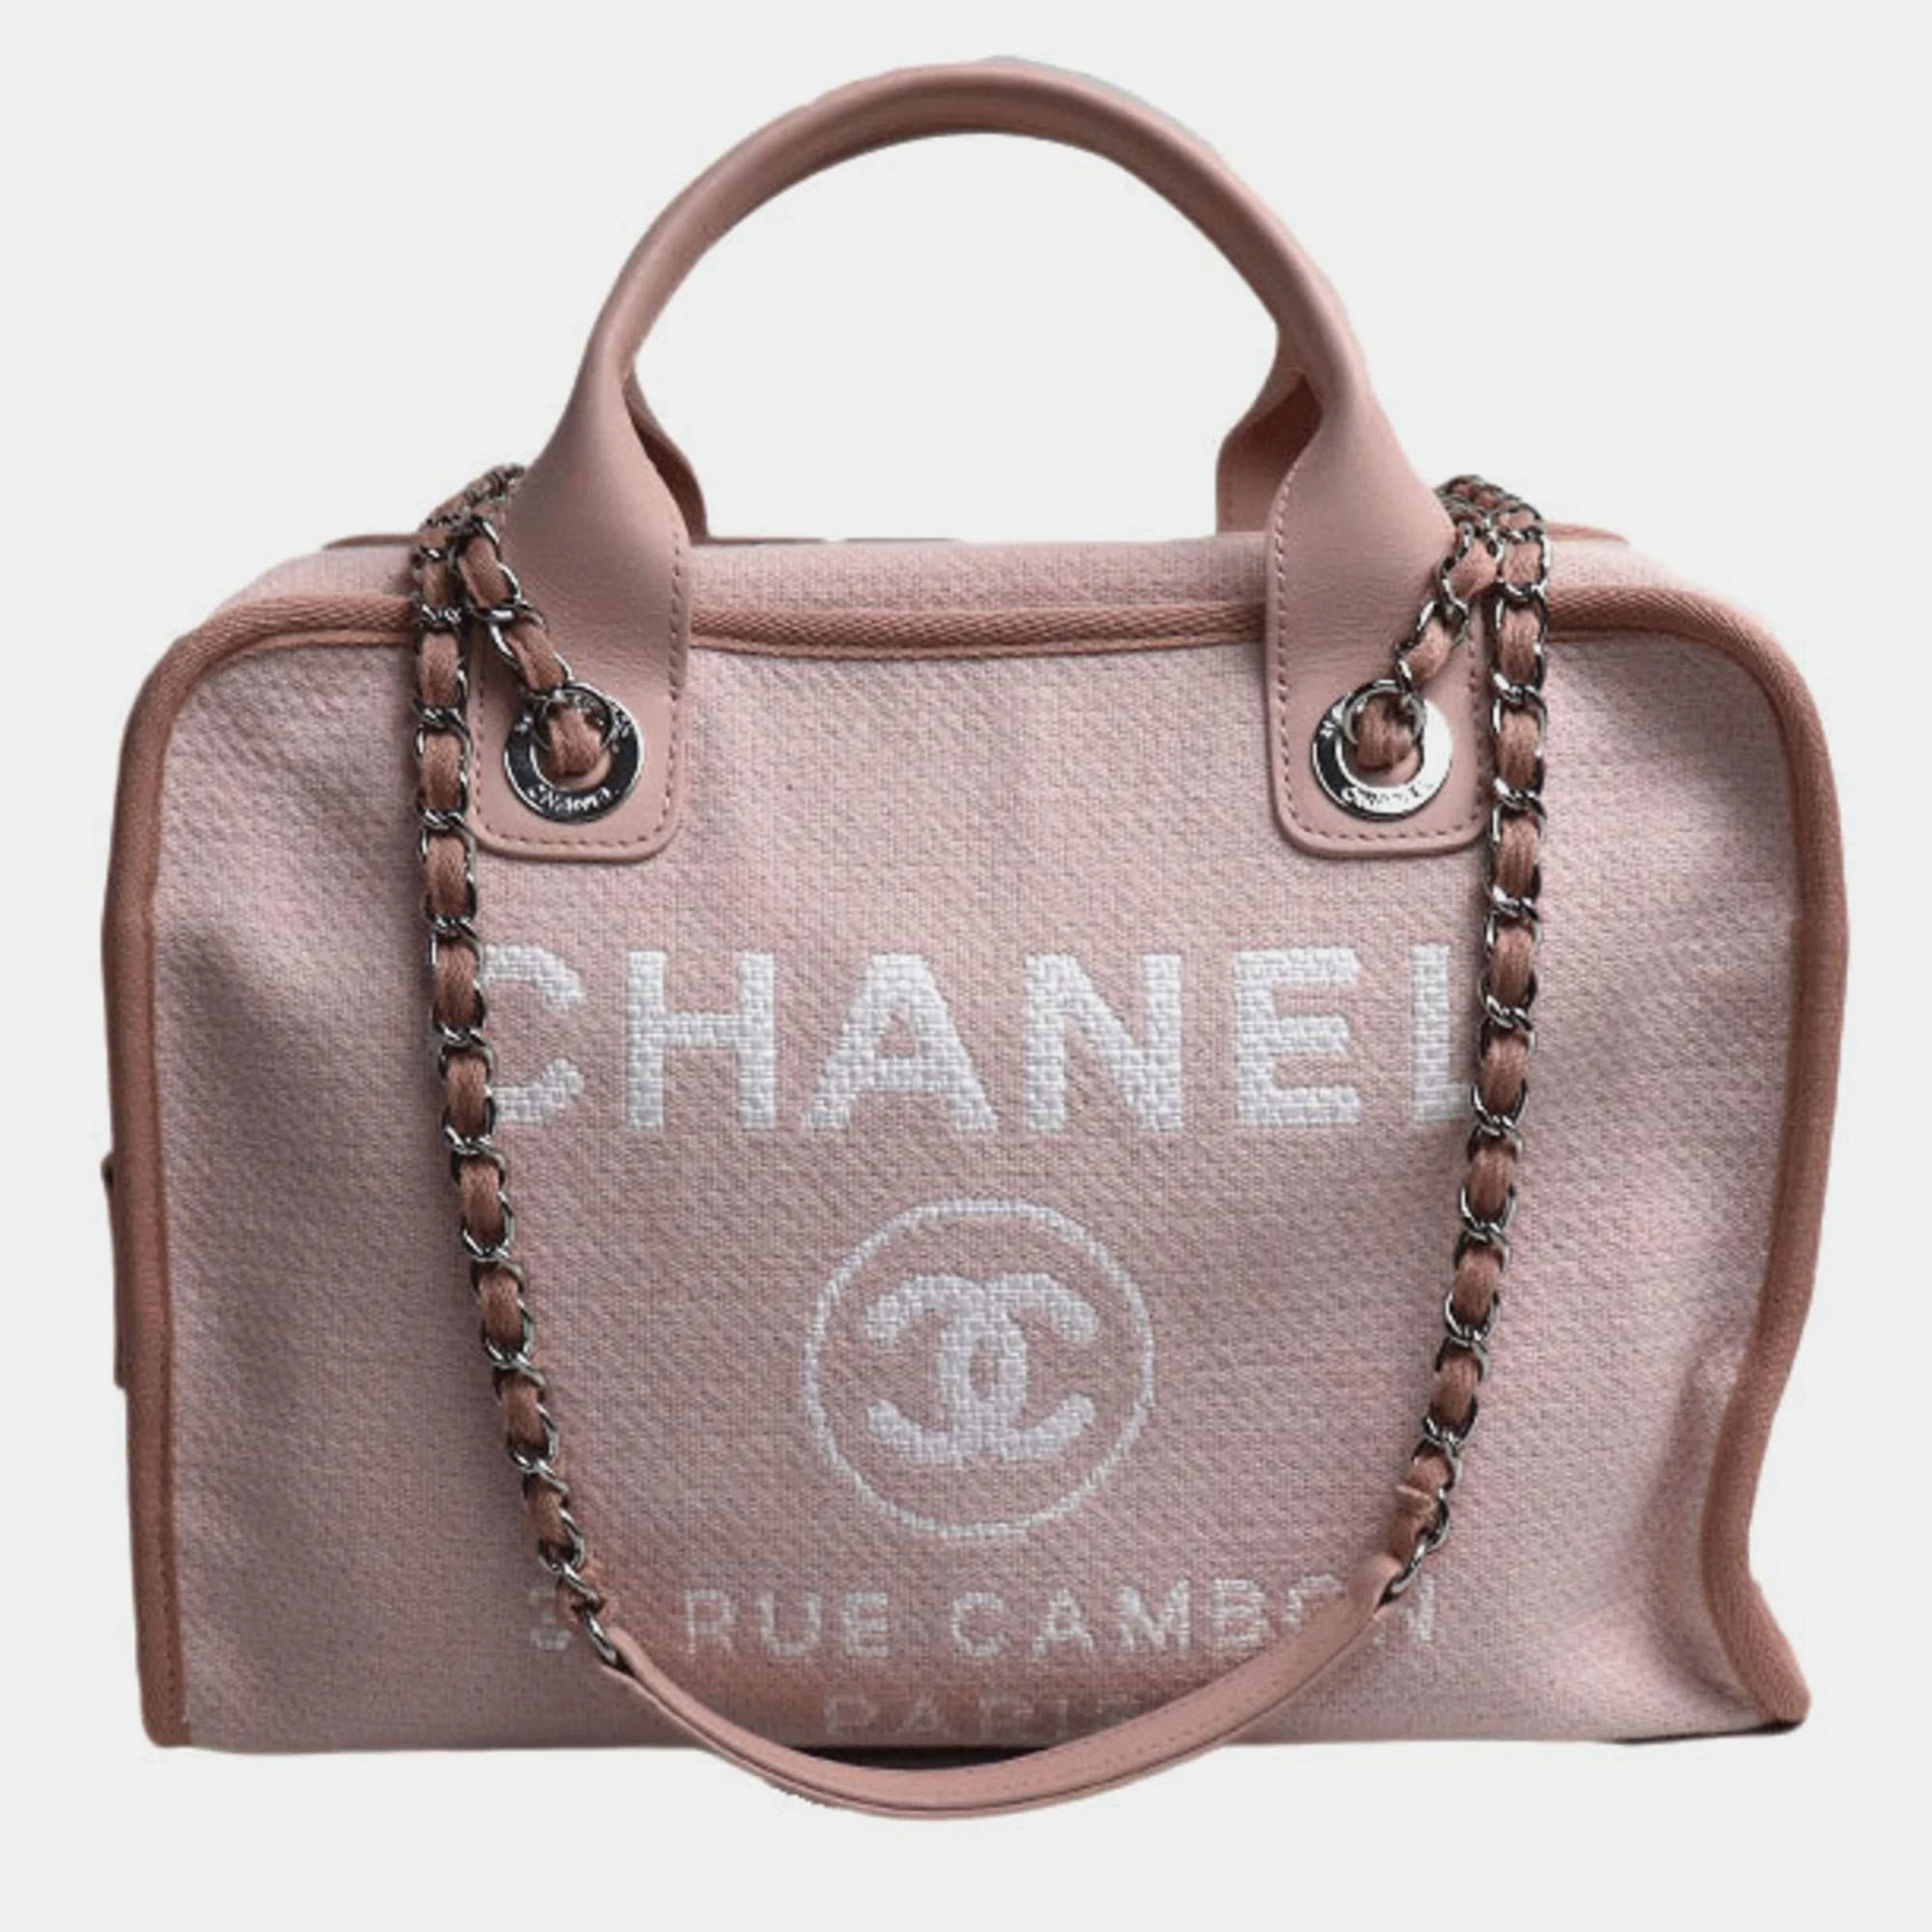 Chanel pink denim small deauville shoulder bags